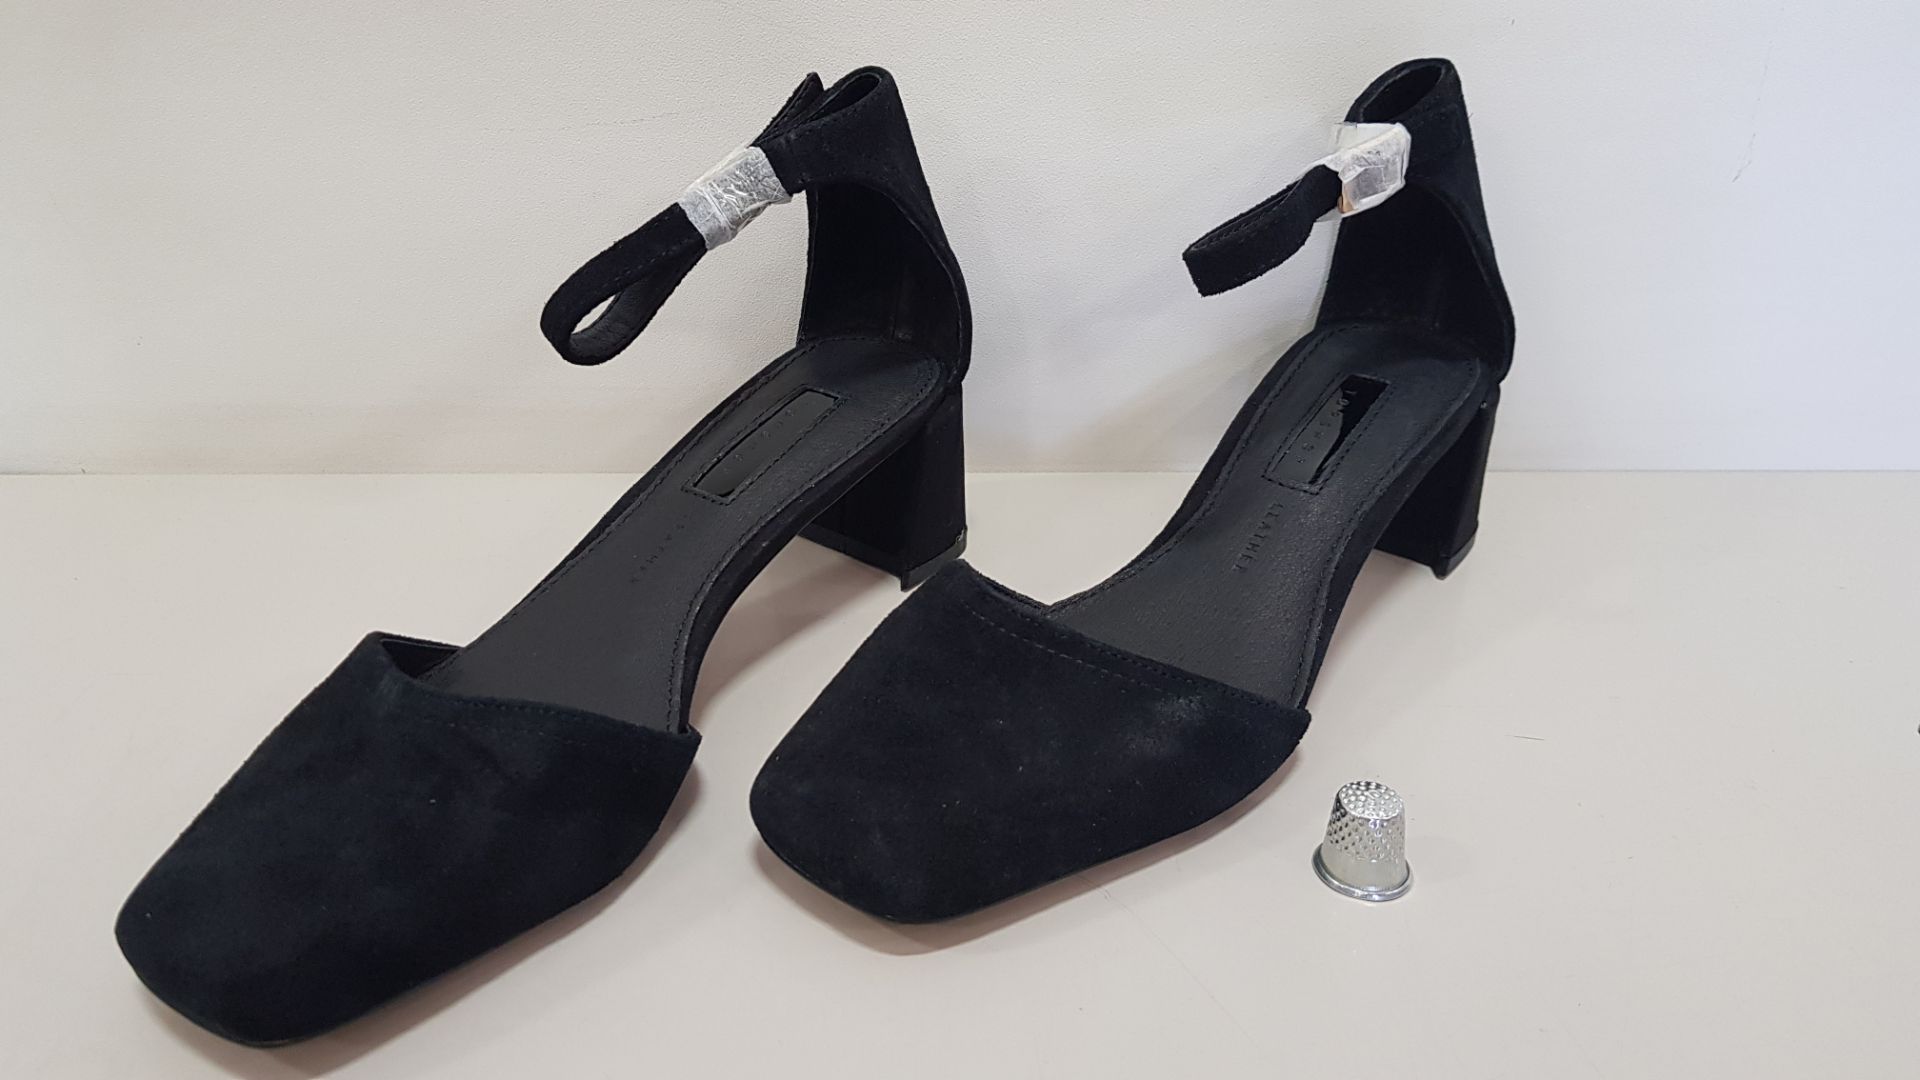 16 X BRAND NEW TOPSHOP SHOES - IE JAY BLACK SHOES UK SIZE 2 RRP £36.00 AND BLACK STRIPPY SHOES UK